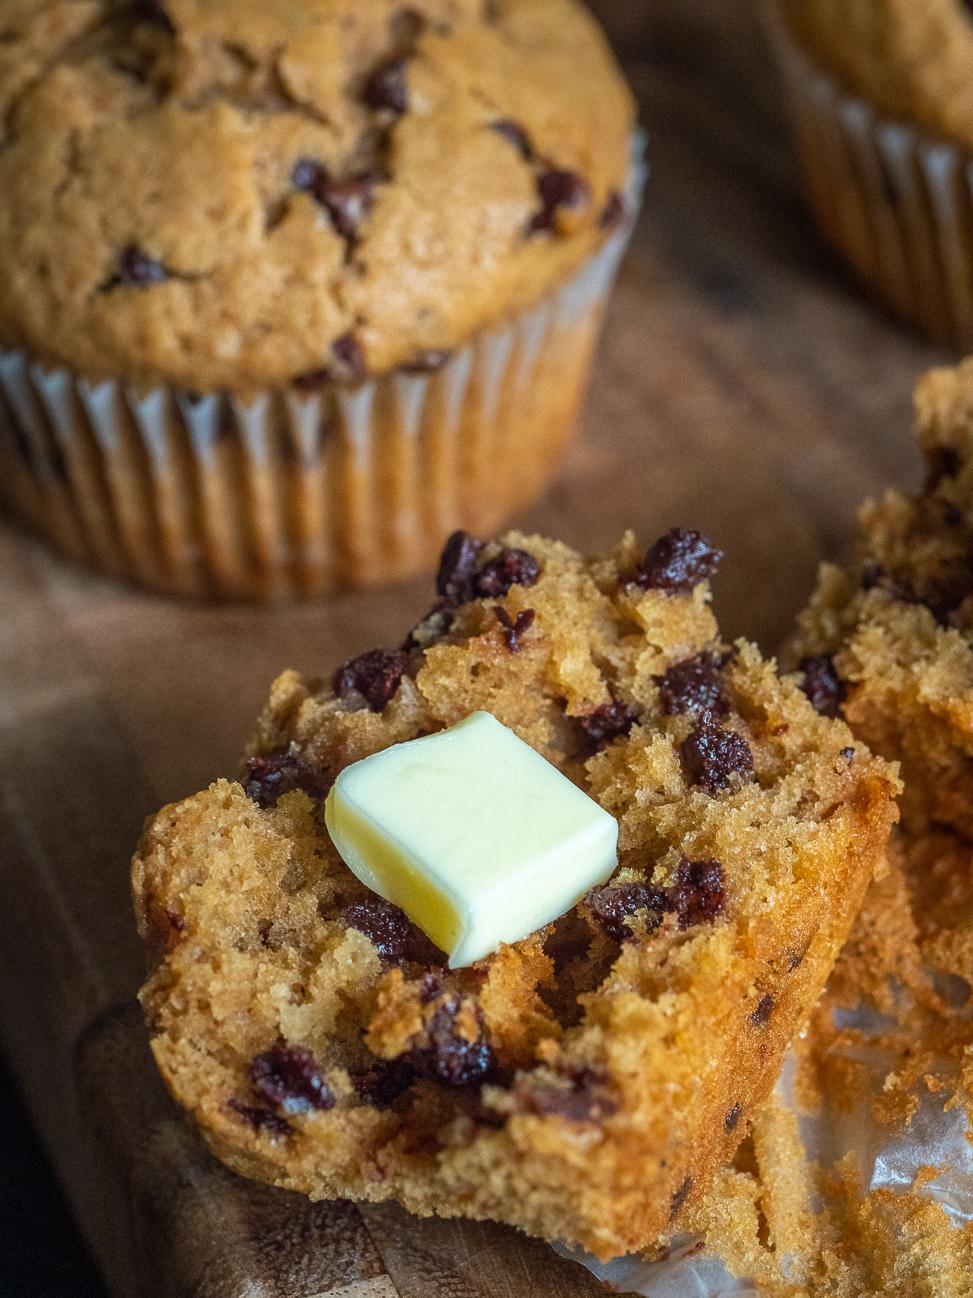 For an extra boost, pair these muffins with a delicious cup of coffee or a latte.